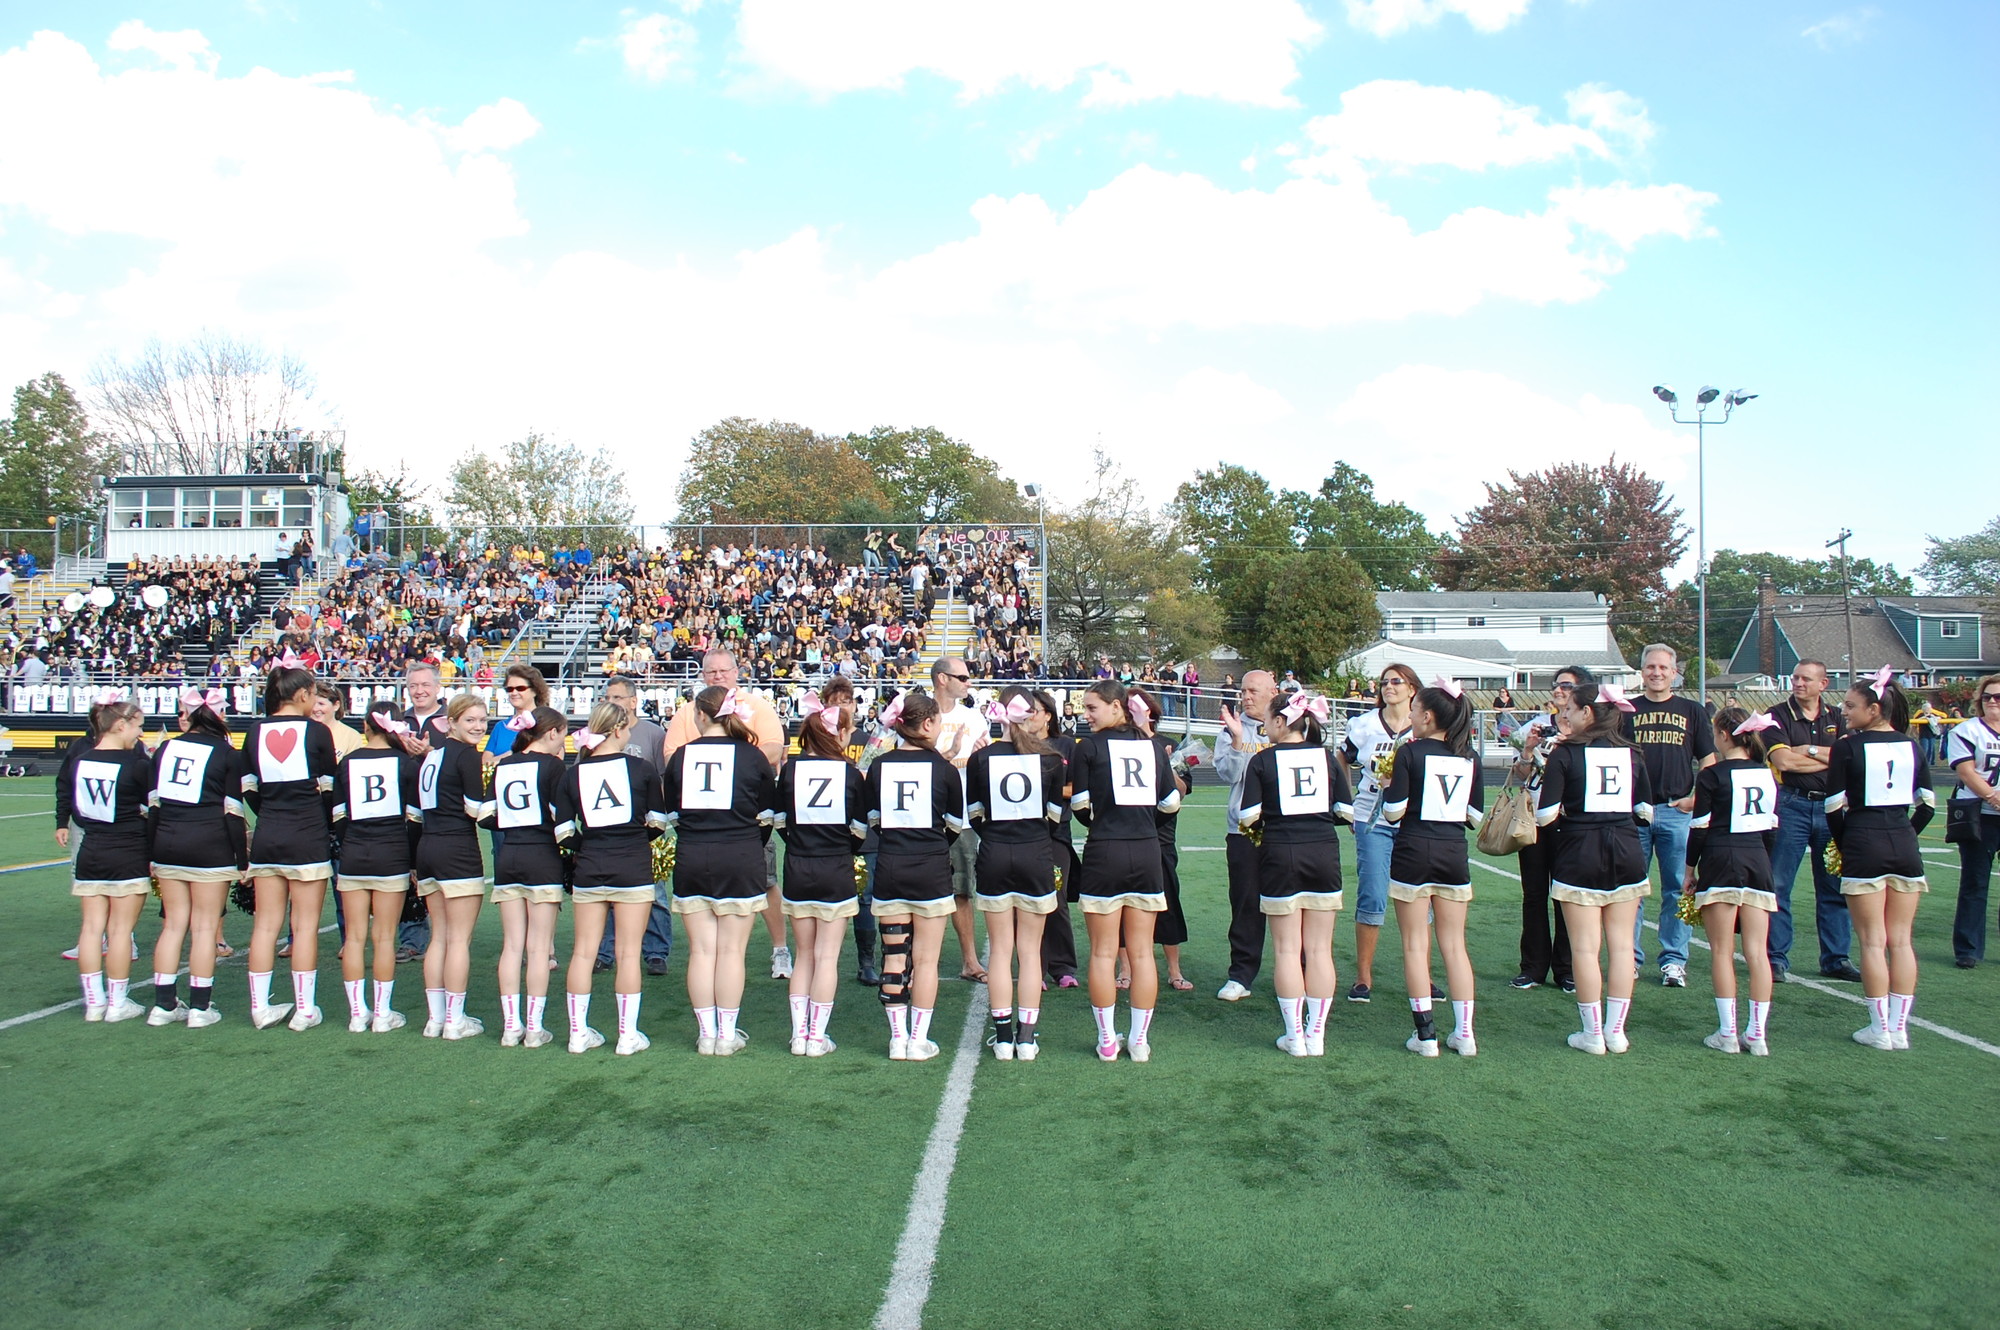 Wantagh High School cheerleaders paid tribute to retiring announcer Bill Bogatz before the Homecoming game on Oct. 18.